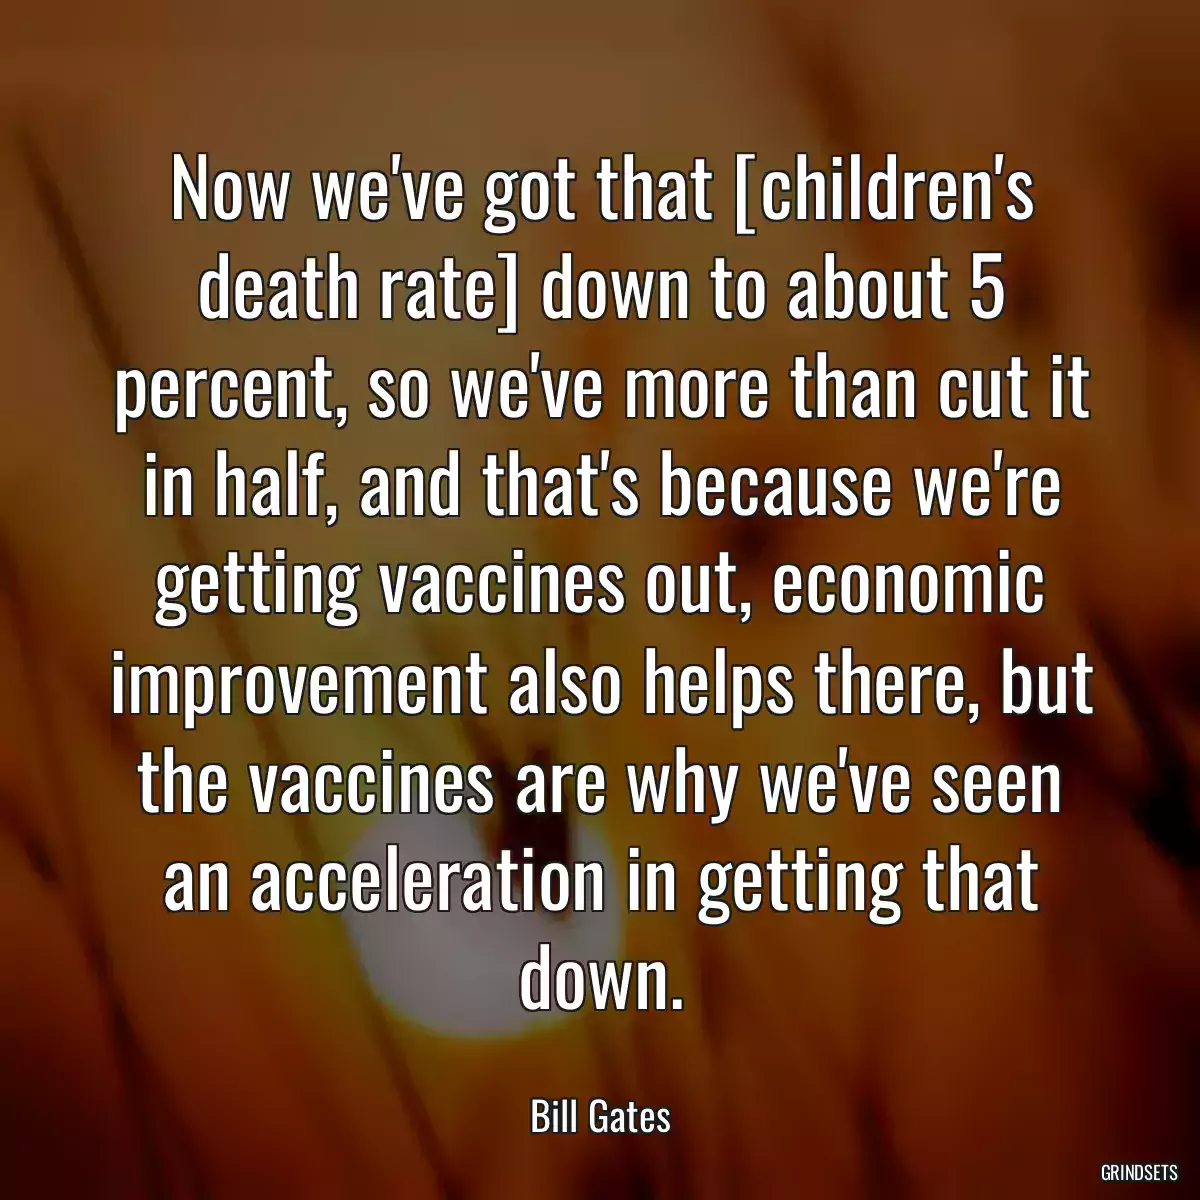 Now we\'ve got that [children\'s death rate] down to about 5 percent, so we\'ve more than cut it in half, and that\'s because we\'re getting vaccines out, economic improvement also helps there, but the vaccines are why we\'ve seen an acceleration in getting that down.